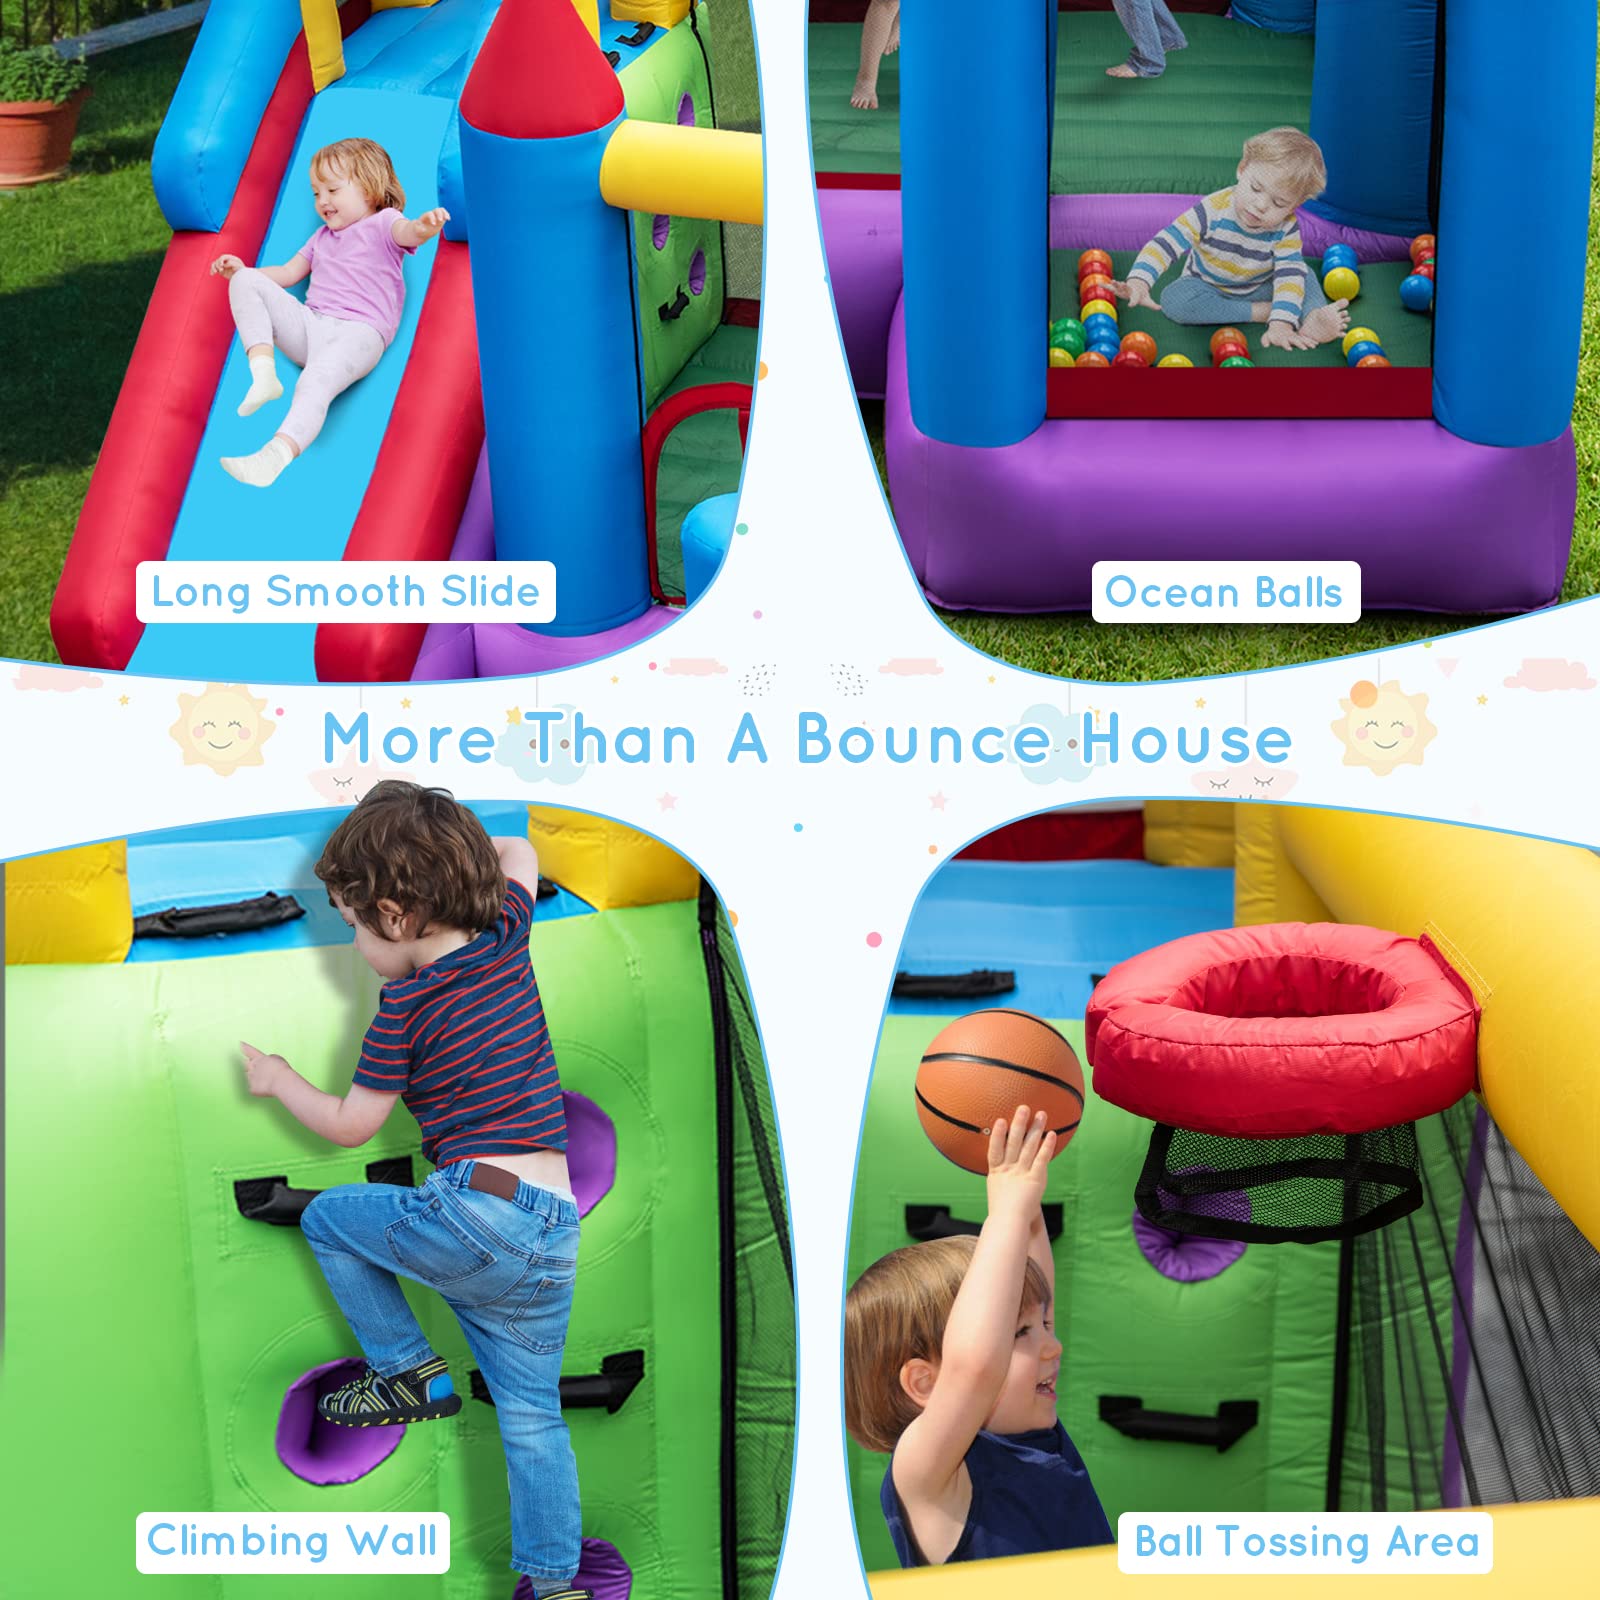 5-in-1 Inflatable Bounce Castle, Giant Blowup Jumping House with Slide for Kids w/735W Air Blower